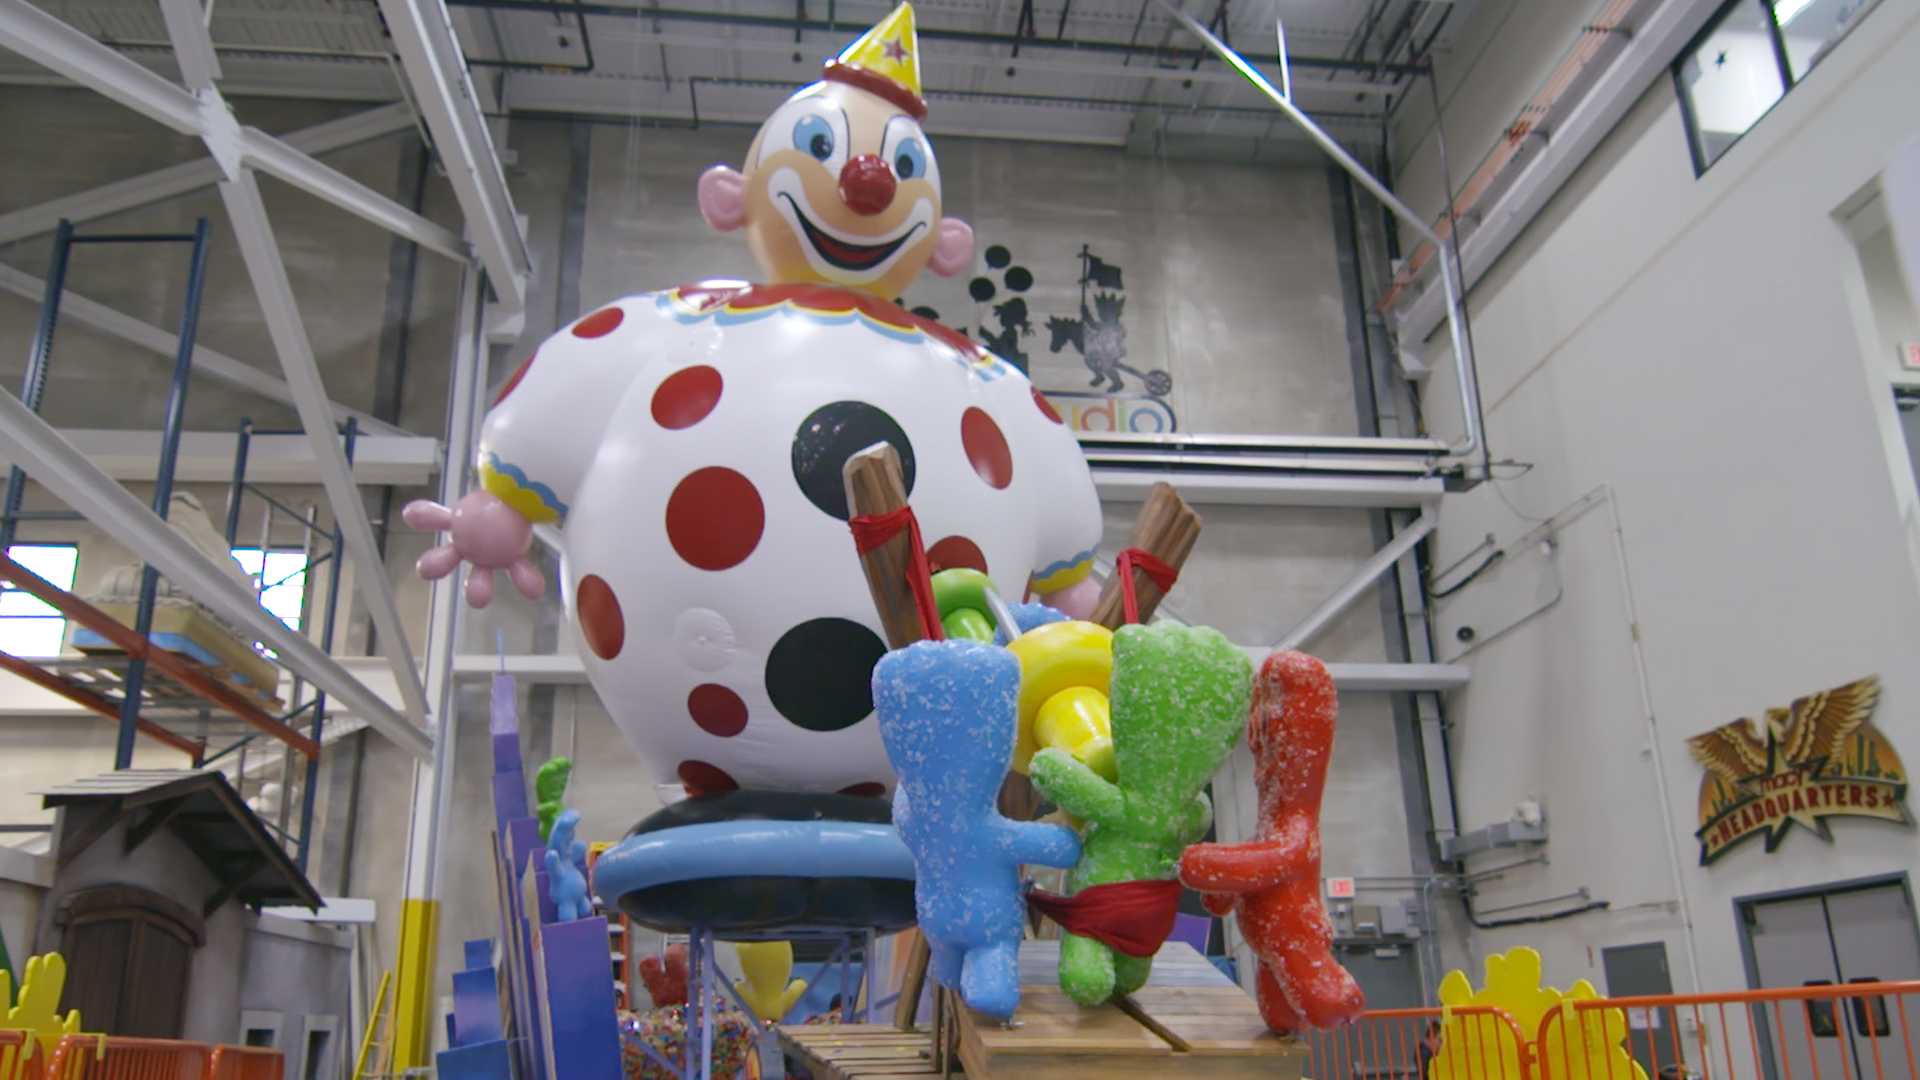 The Macy's Thanksgiving Day Parade is debuting the coolest new floats this year